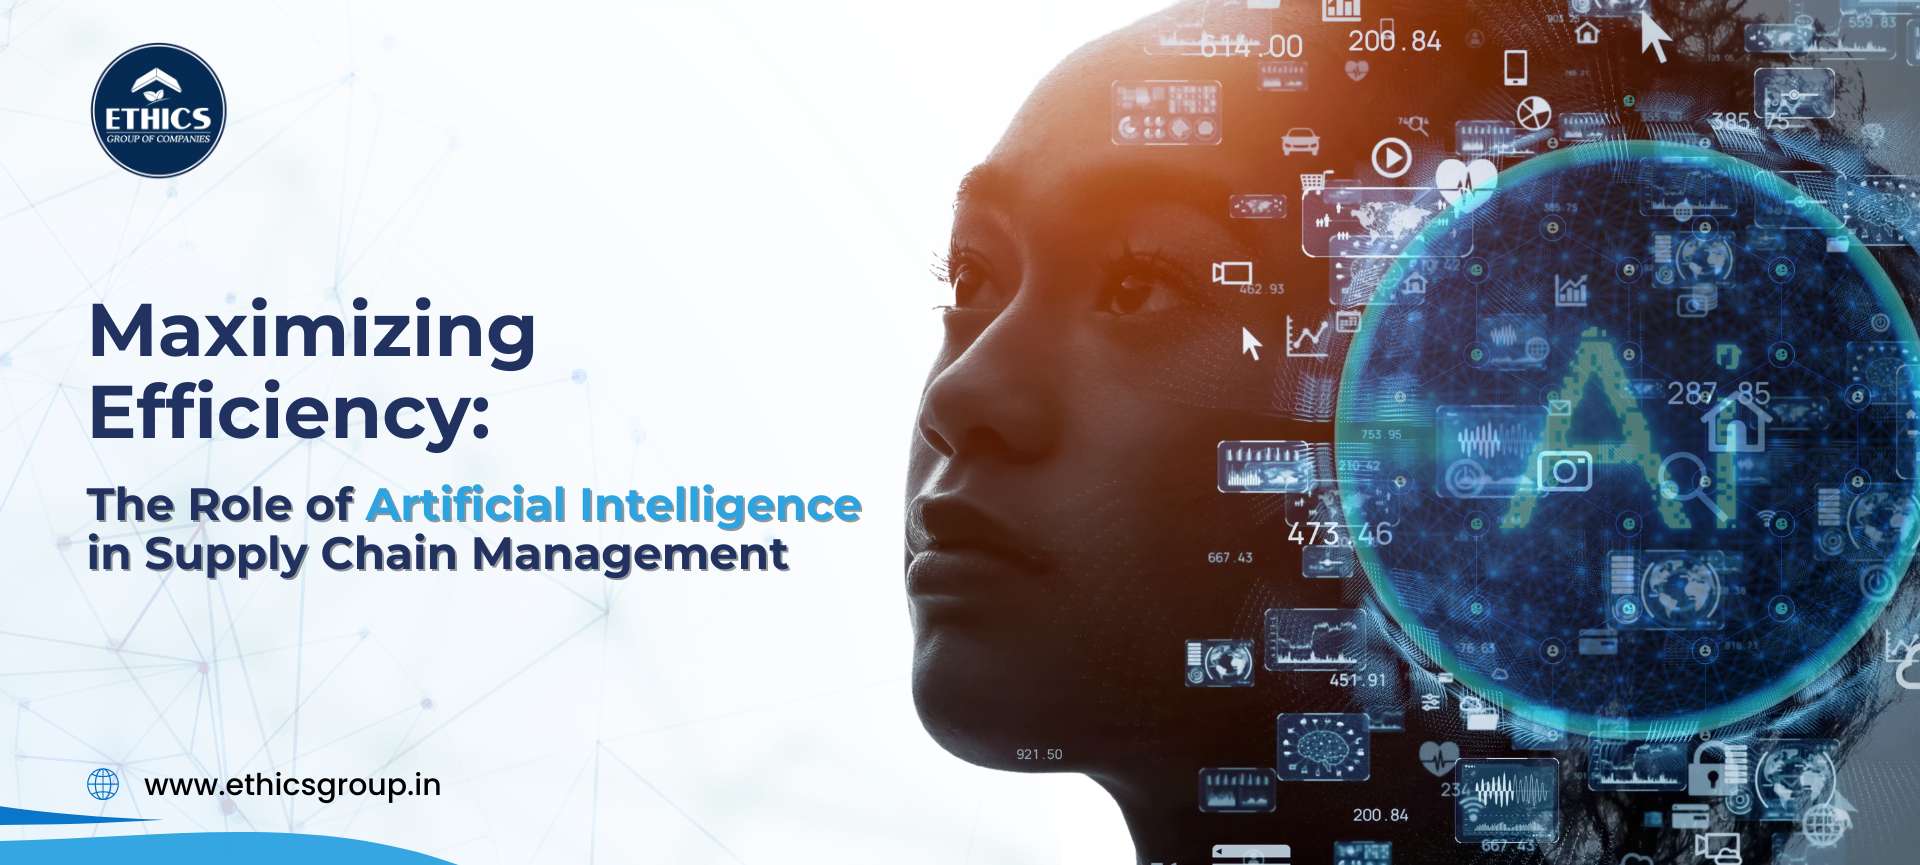 Role of Artificial Intelligence in Supply Chain Management for predicting demand, optimizing routing, and automating warehouses.